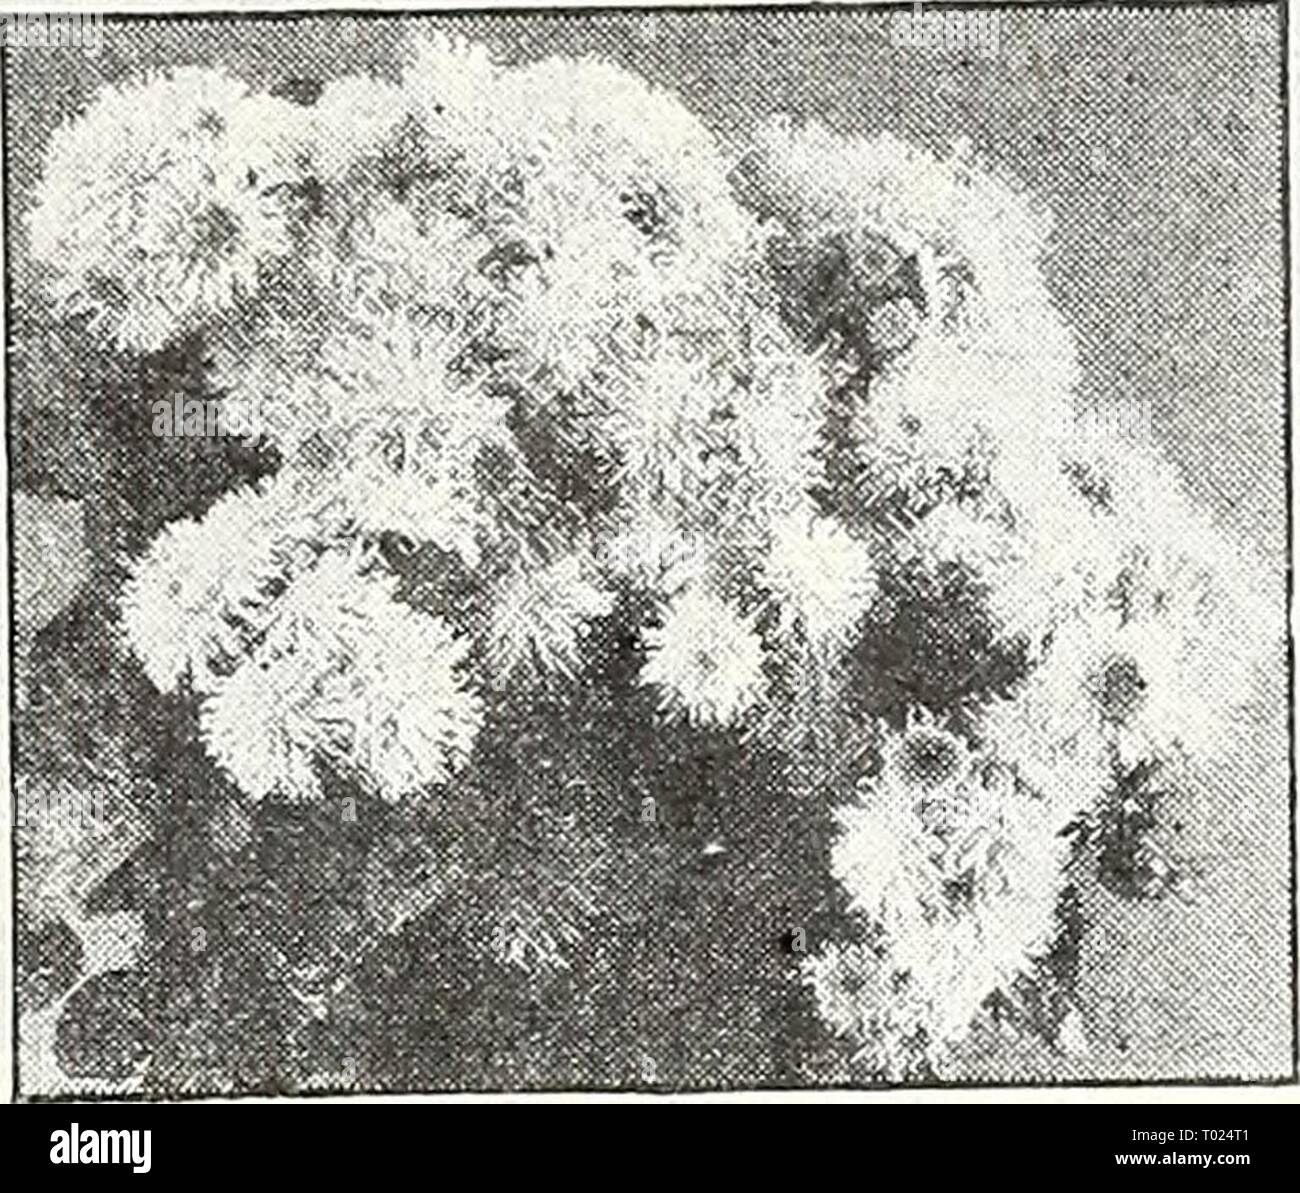 Dreer's garden book for 1947 . dreersgardenbook1947henr Year: 1947  Achillea ptarmica. The Pearl Achillea—^''/«'' t^^] ® 1012 Filipendula, Cloth of Cold. Strong,* vigorous plants with vivid yellow flowers during the summer. 3 ft. Pkt. 15c; large pkt. 60c. 1015 Ptarmica, The Pearl. One of the best hardy white perennials. Grows about 2 feet tall and is cov- ered with heads of pure white dou- ble flowers from June until frost. Flowers the first season if sown early. Pkt. ISc; large pkt. 60c. * AcOnitum—Monk Hood Helmet Flower [hp] ® 1 025 Wilsoni. Large rich violet-blue flowers on spikes 5 to 6  Stock Photo